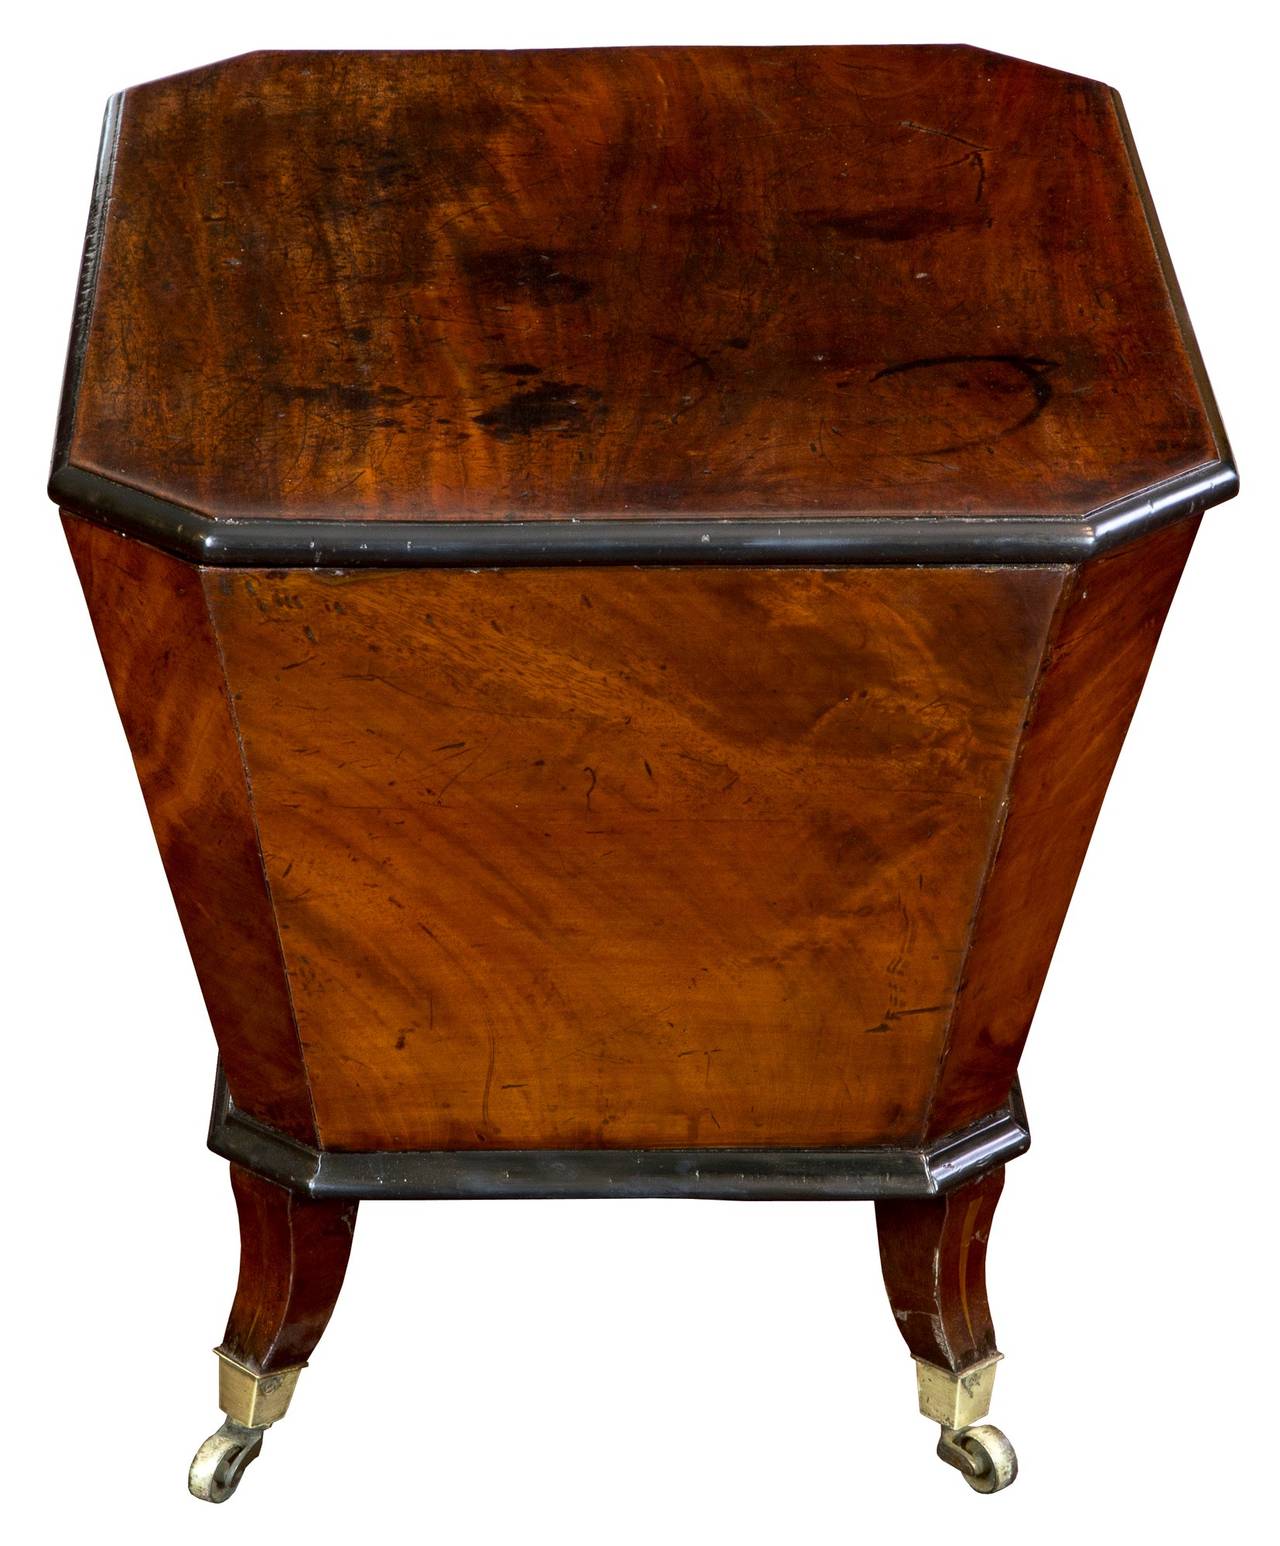 This mahogany cellarette has a solid mahogany top showing years of staining which have been over-polished time and again. The case has a wonderful 18th century feeling and the feet, which are all original including casters has a light wood inlay.